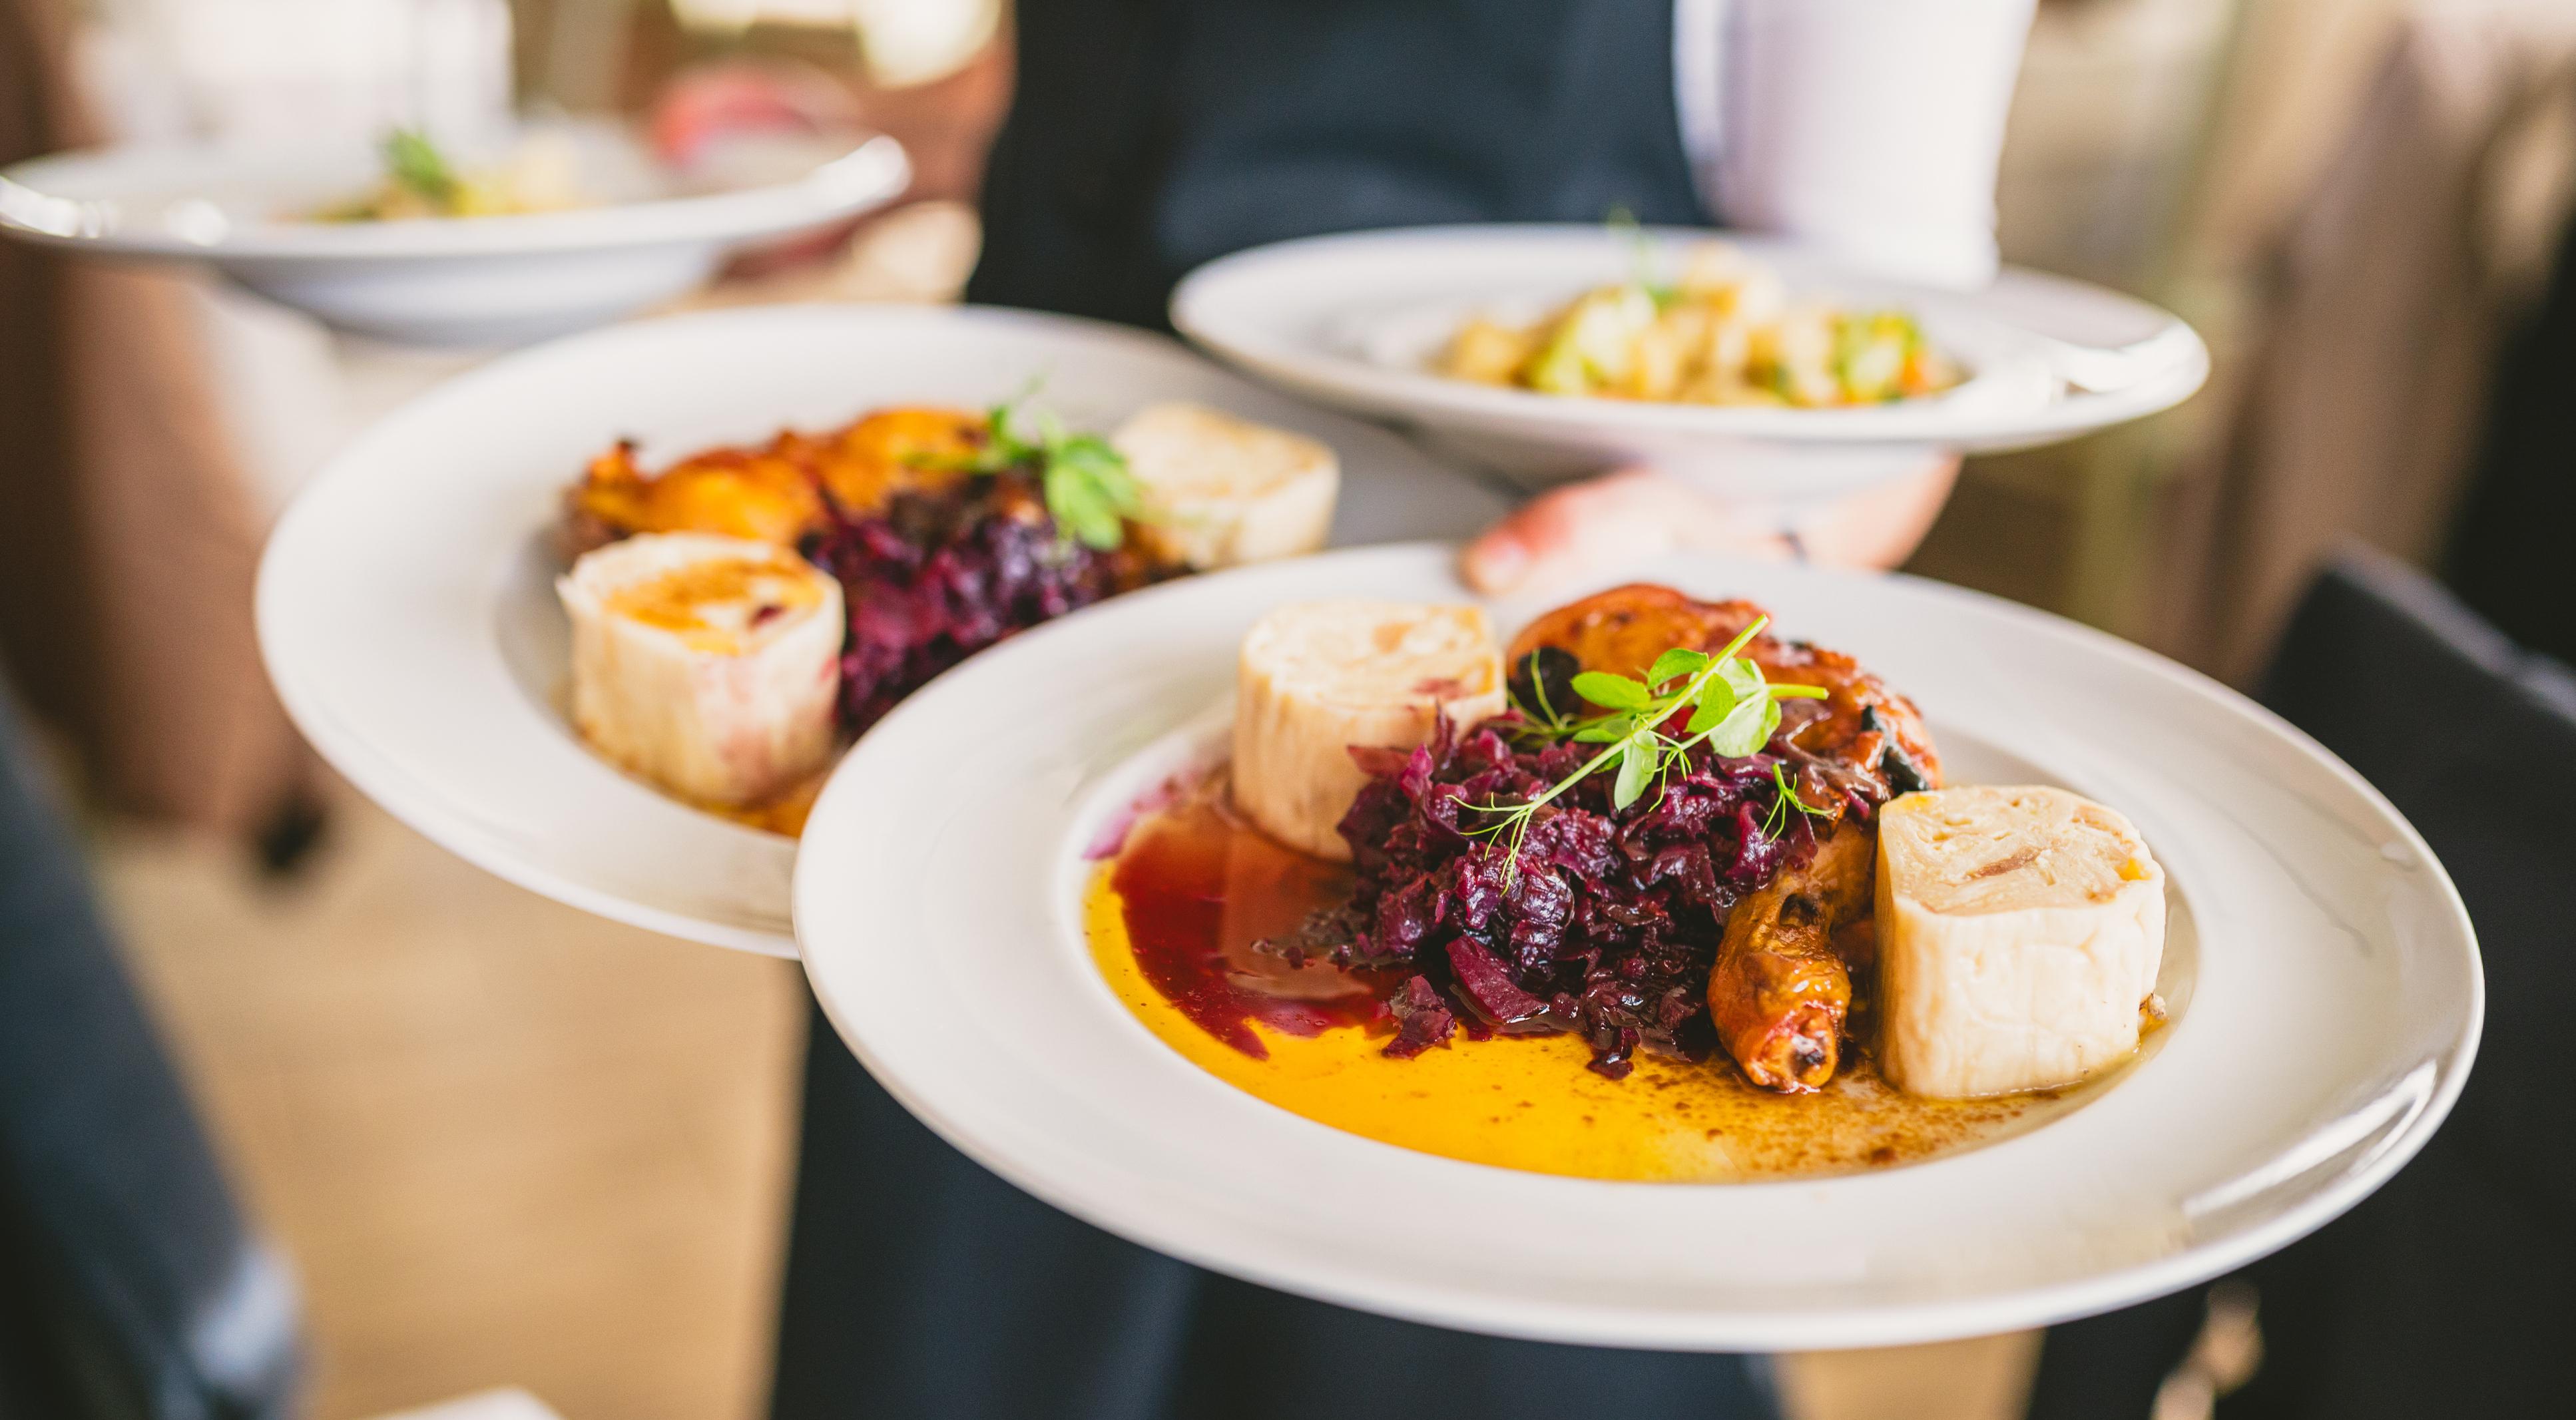 Waiter carrying multiple plates with red cabbage and chicken dish.